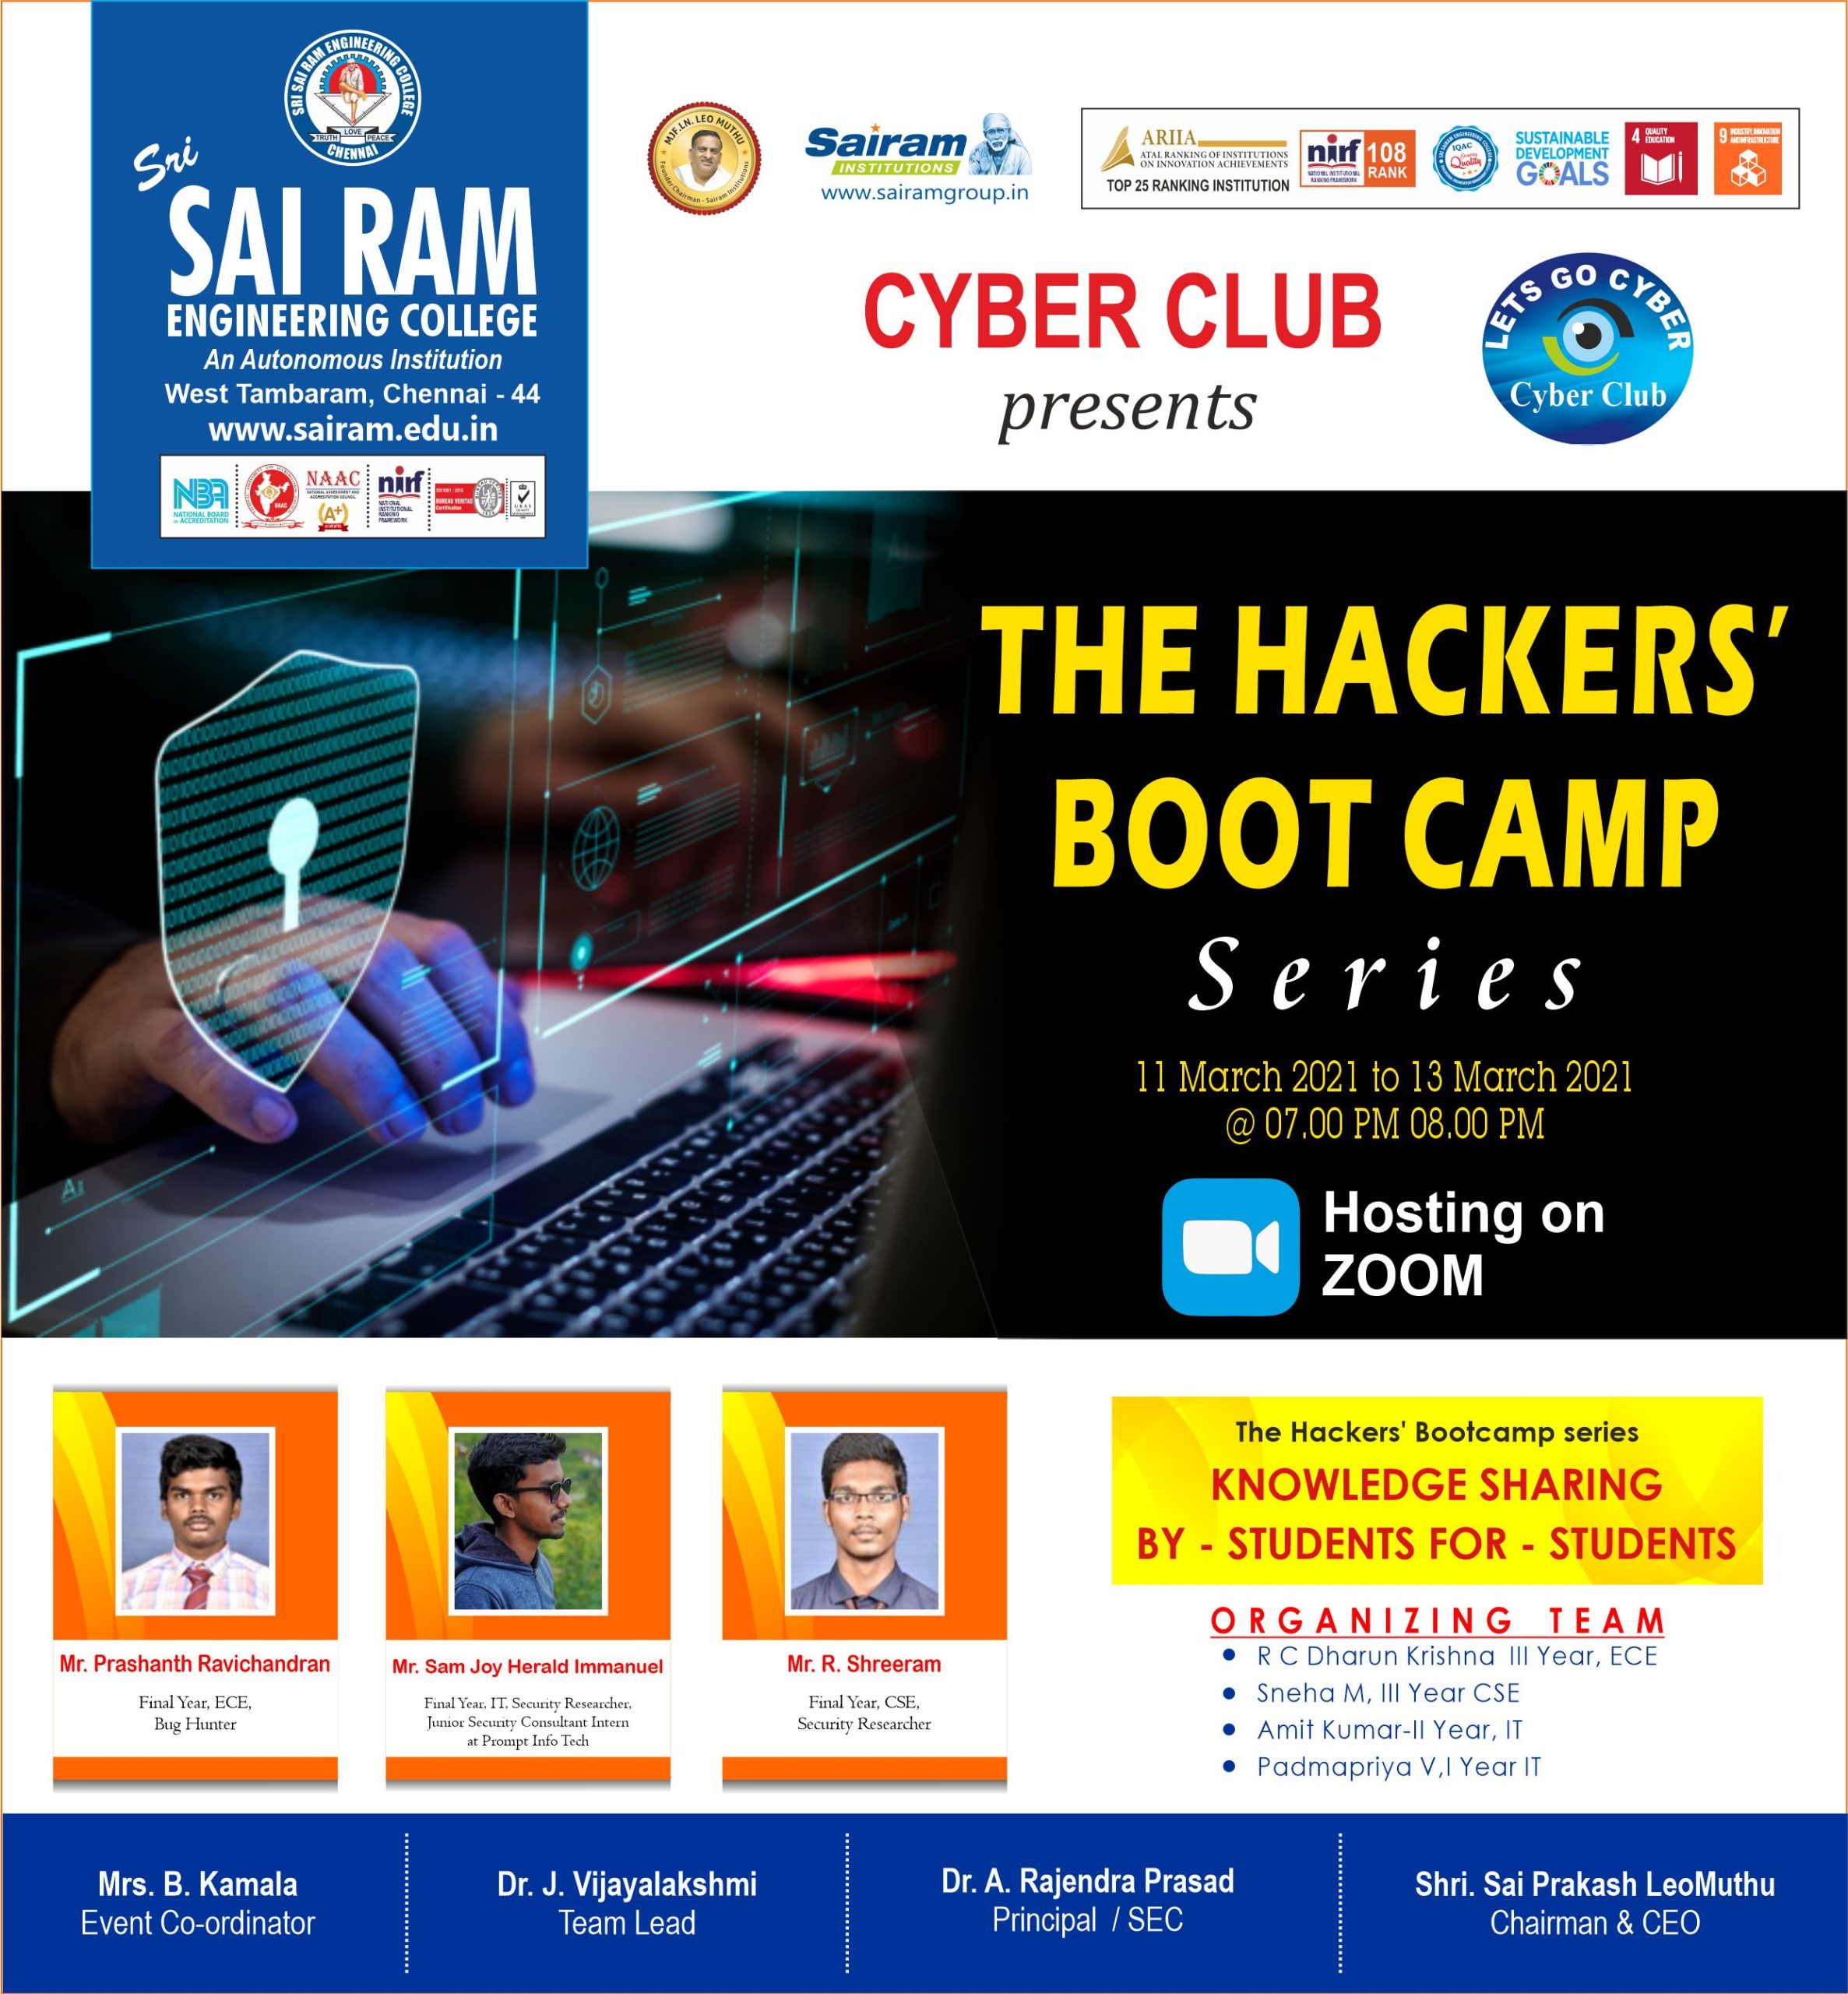 “Cyber Club is organizing “The Hackers’ Bootcamp Series” from 11th March 2021 to 13th March 2021 at 7pm and 8pm”